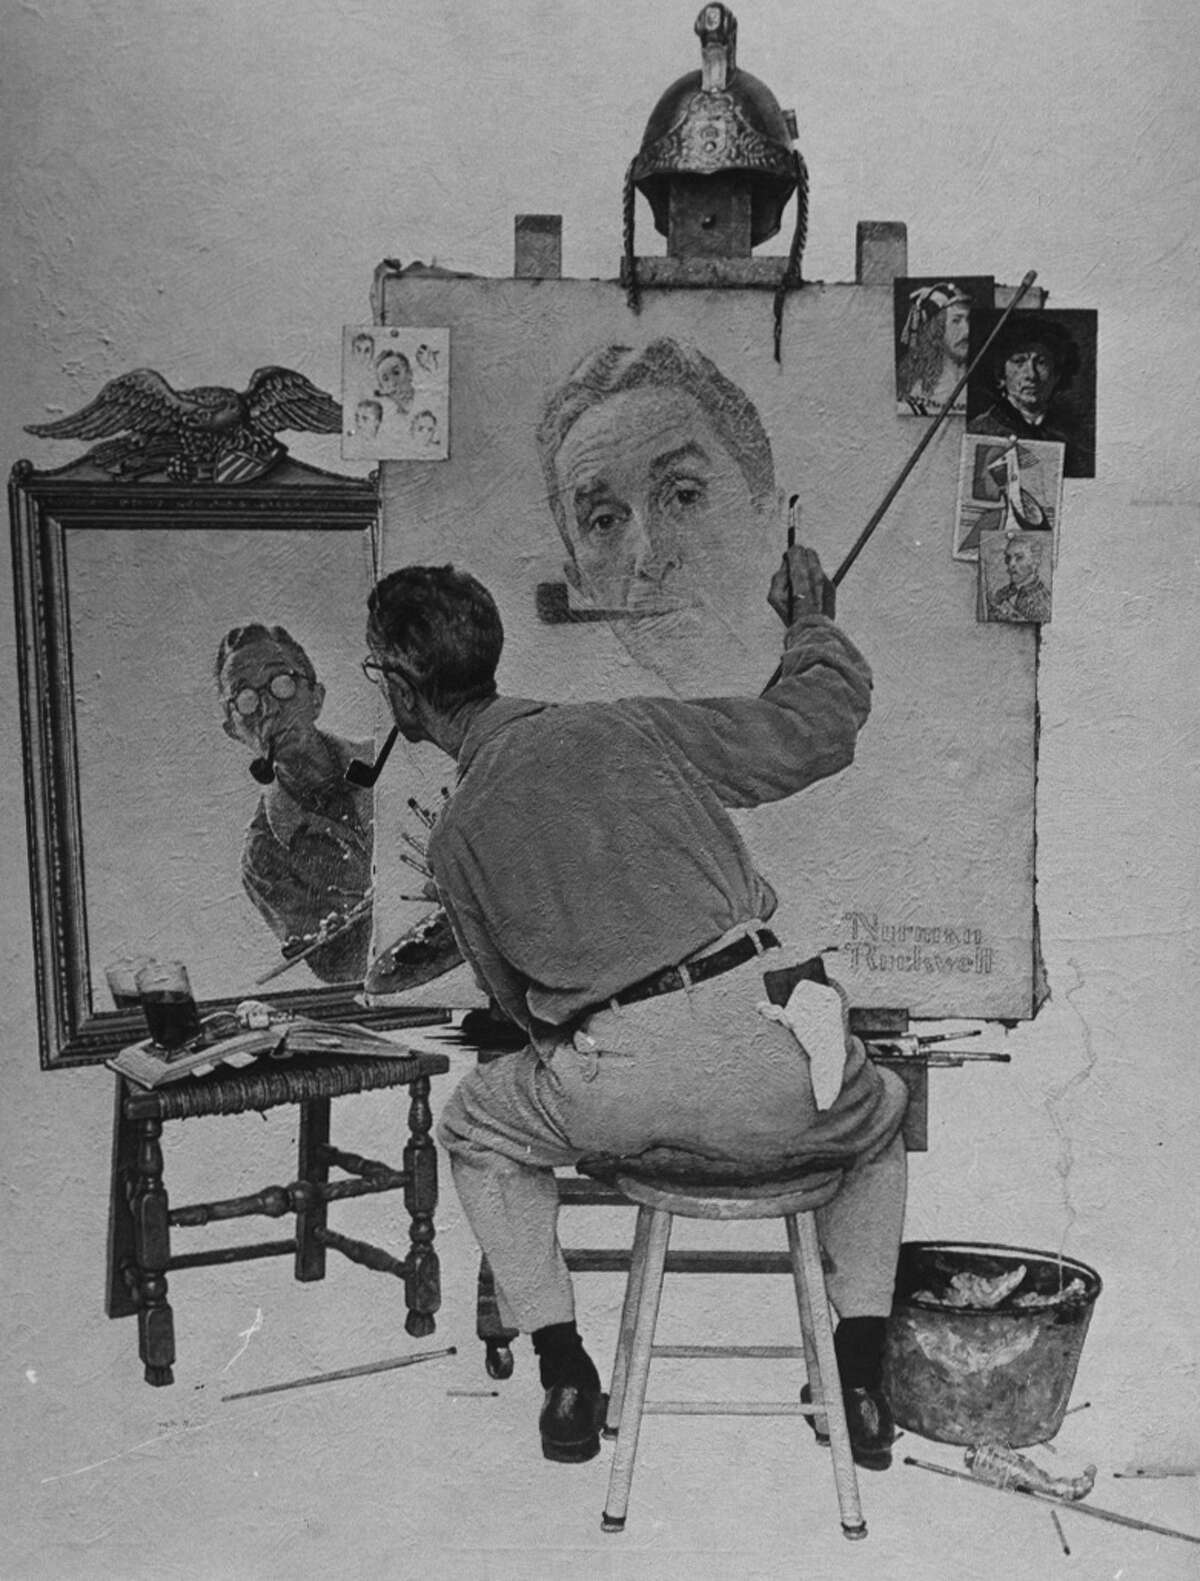 Norman Rockwell, 'Self Portrait. (Times Union Archive) ORG XMIT: MER2013112311313202